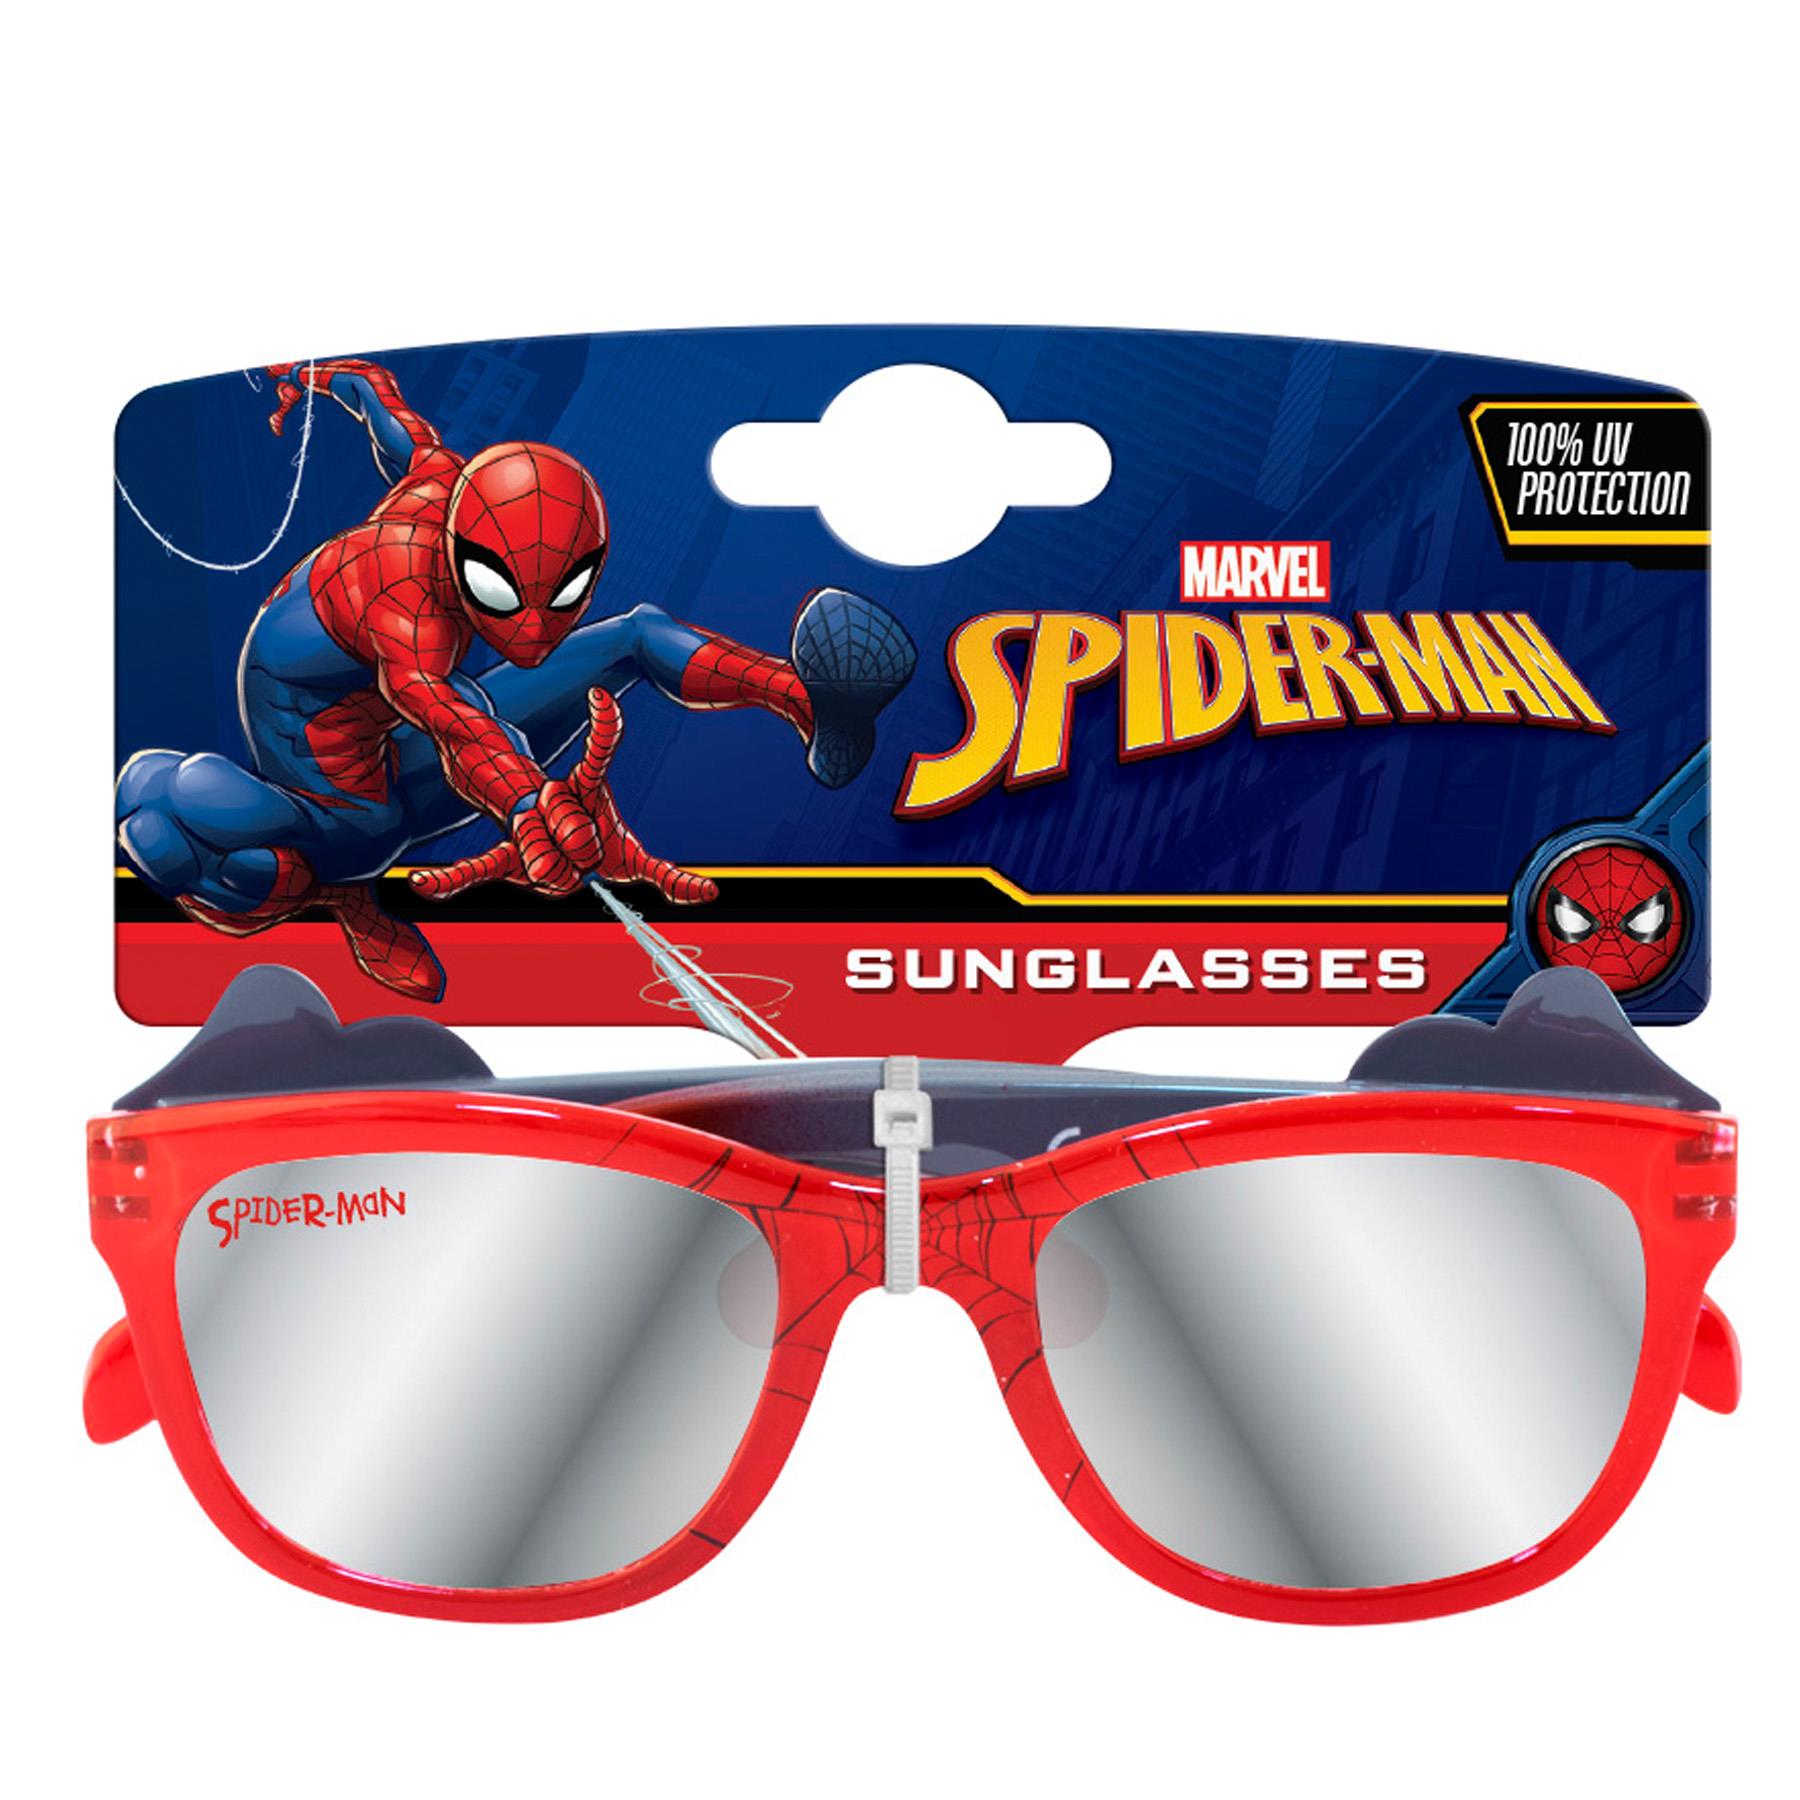 Superheroes Children's Sunglasses UV protection for Holiday - Marvel Spiderman SP23